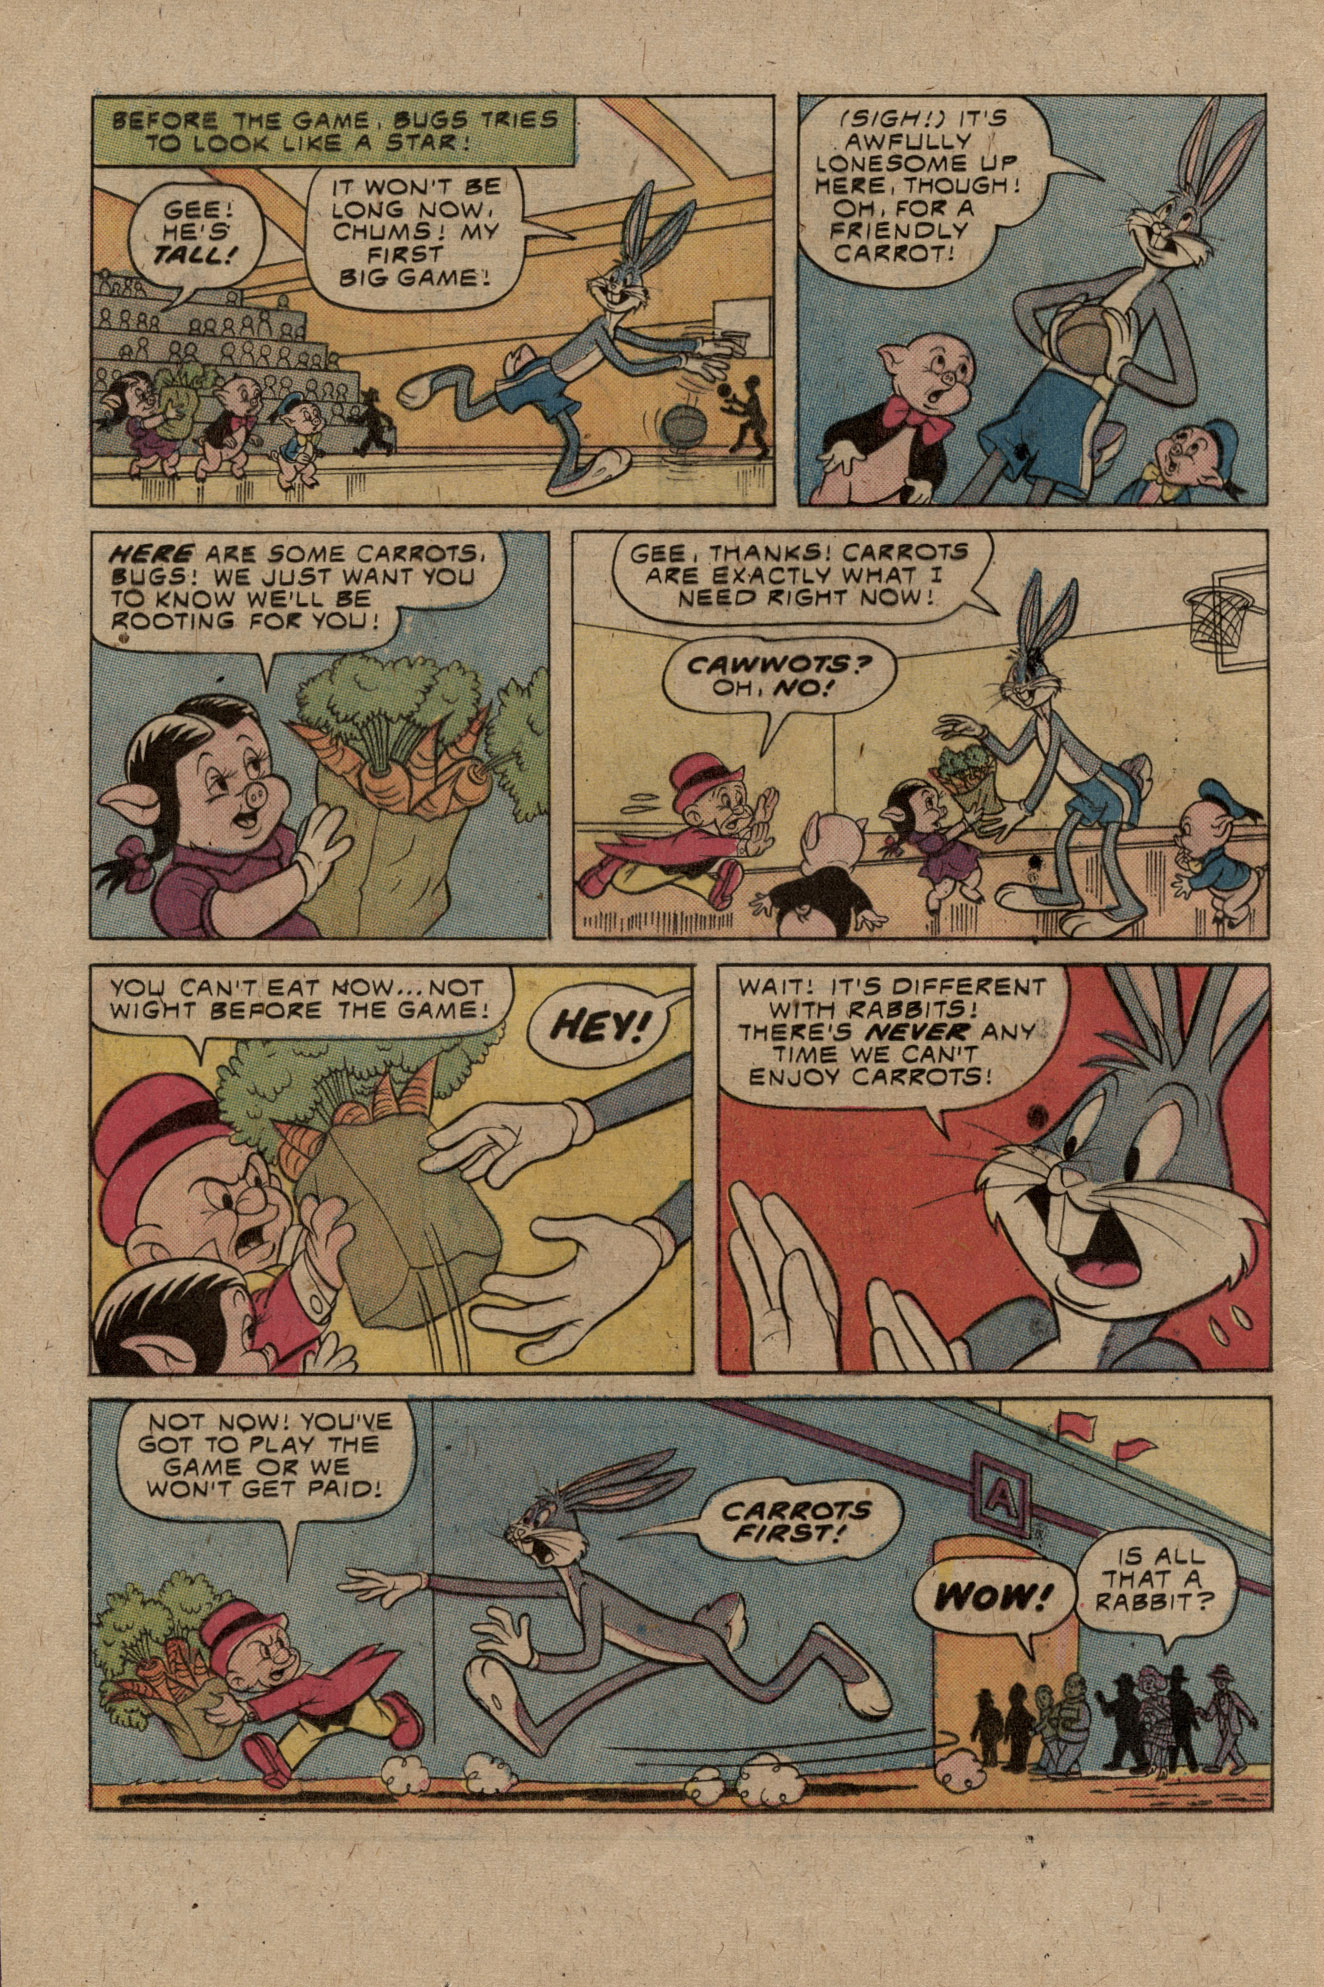 Read online Bugs Bunny comic -  Issue #160 - 16